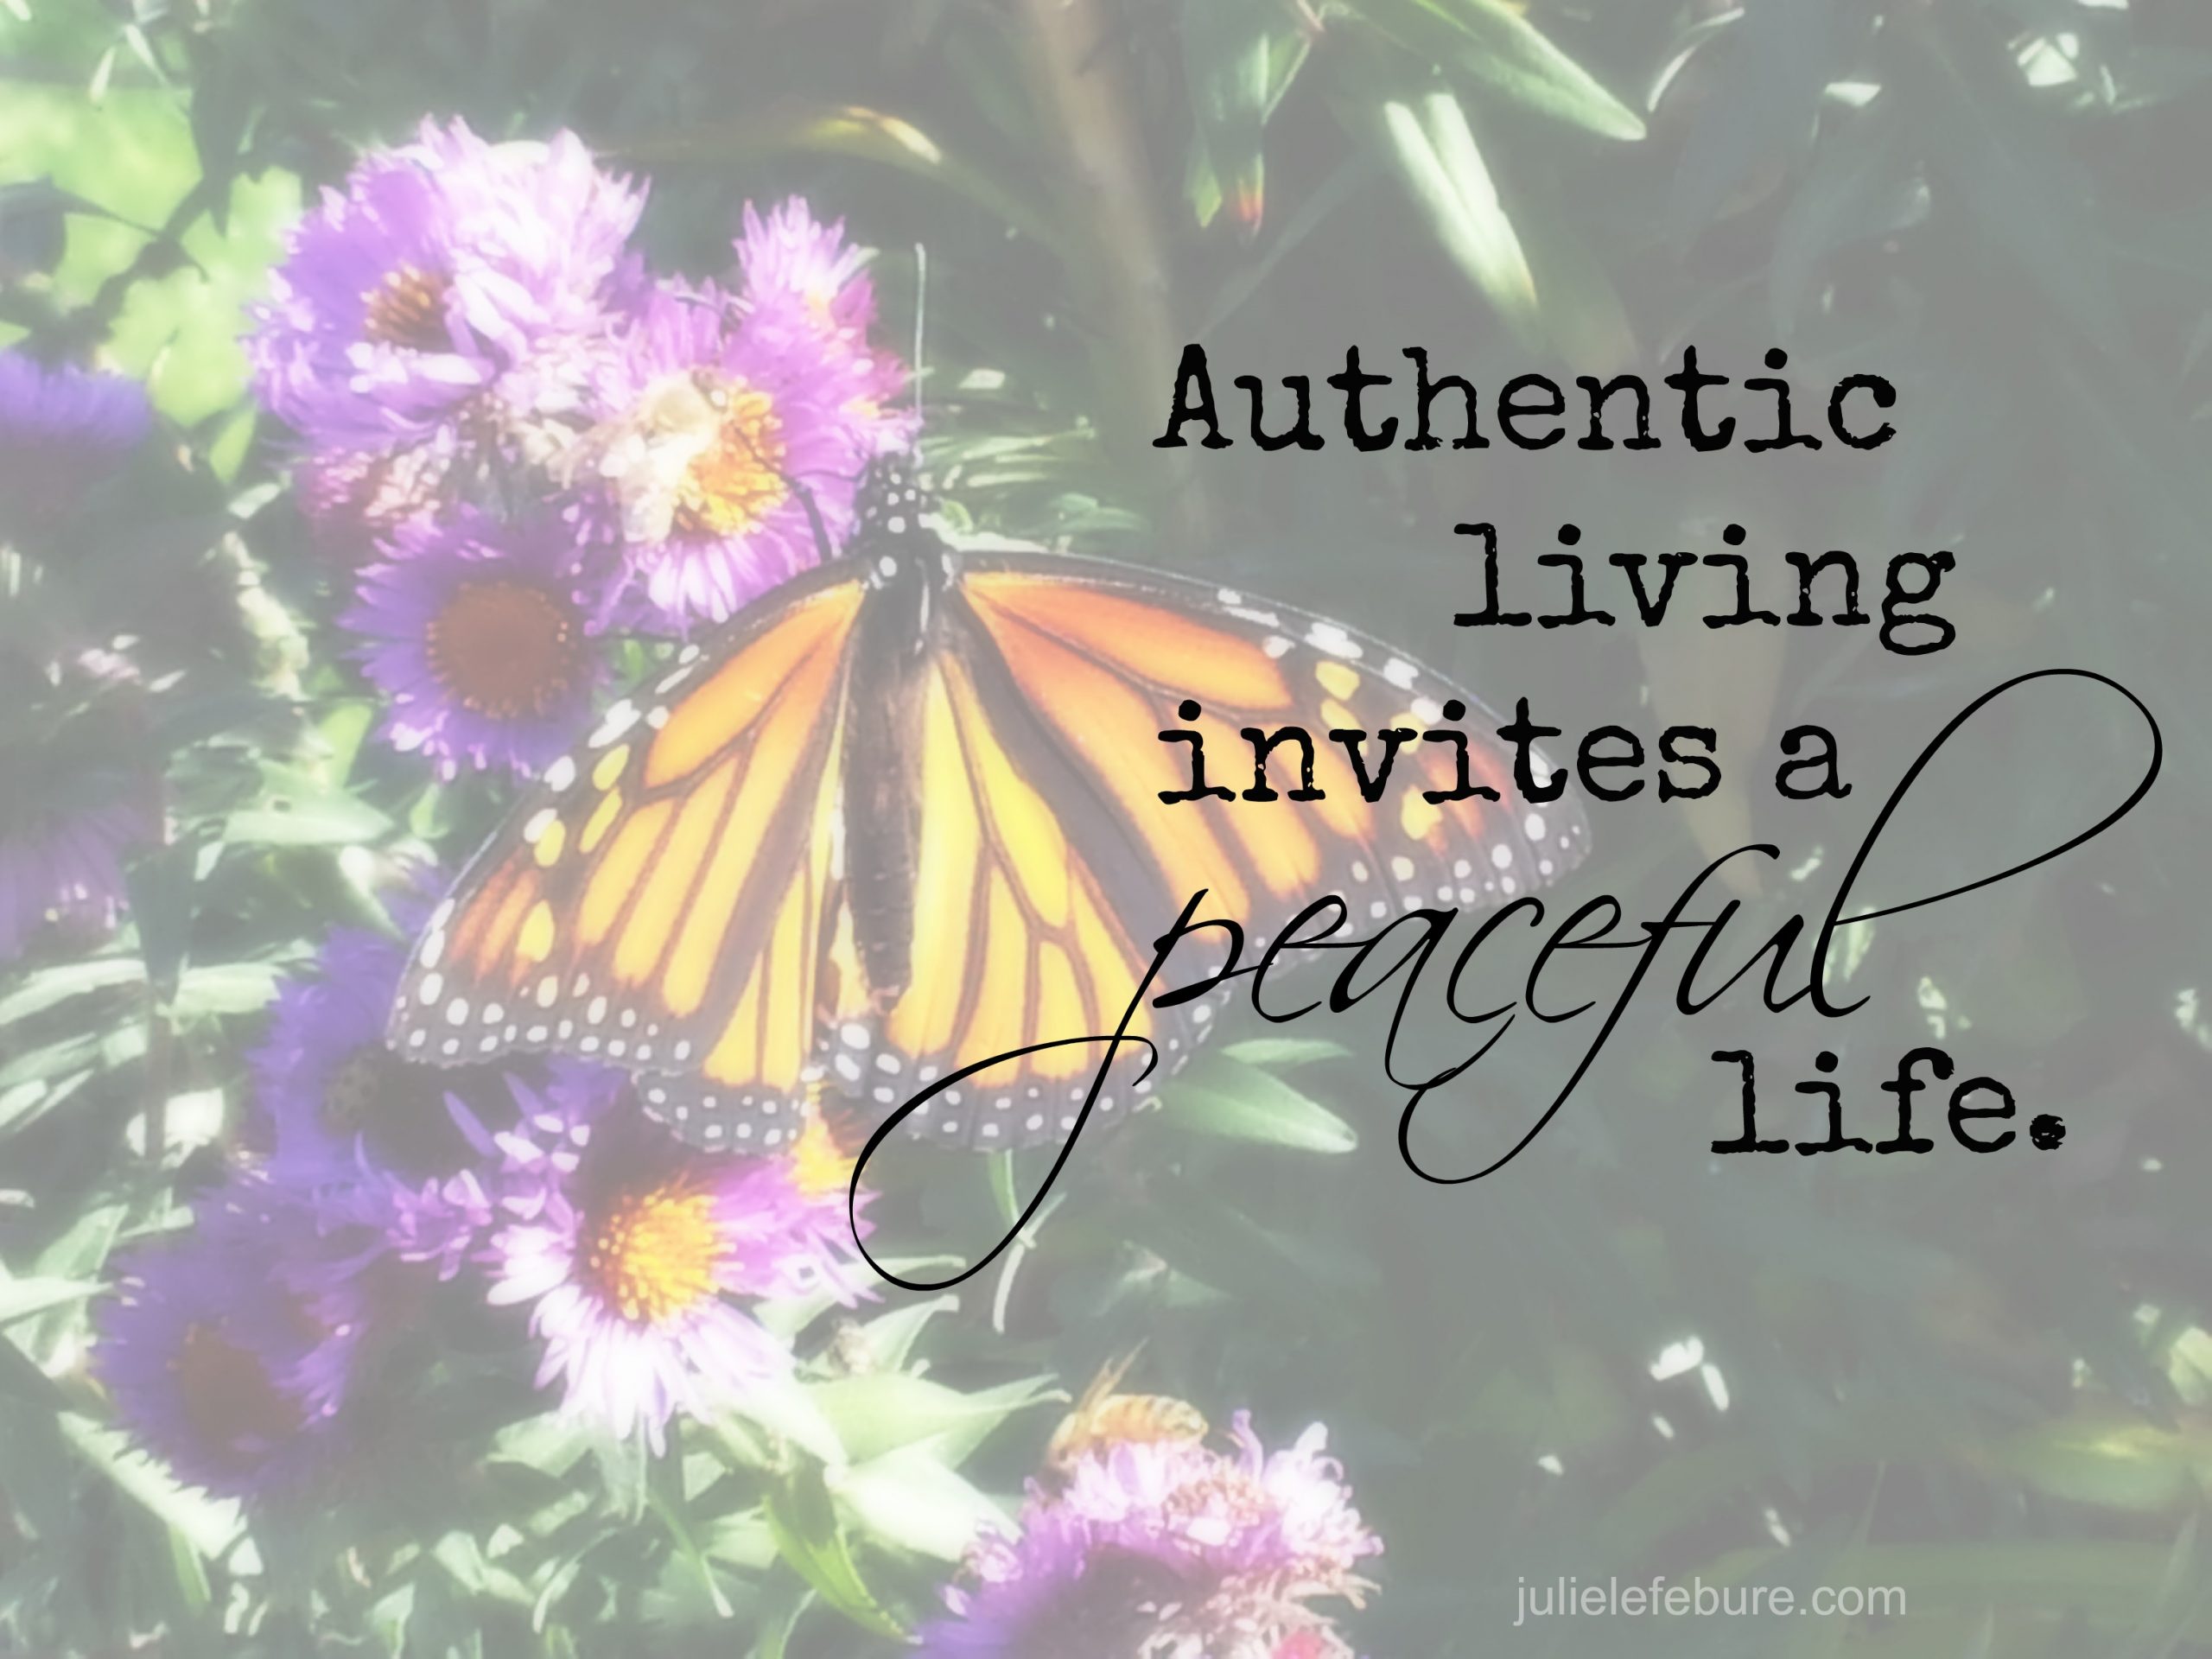 There’s Peace In Authentic Living